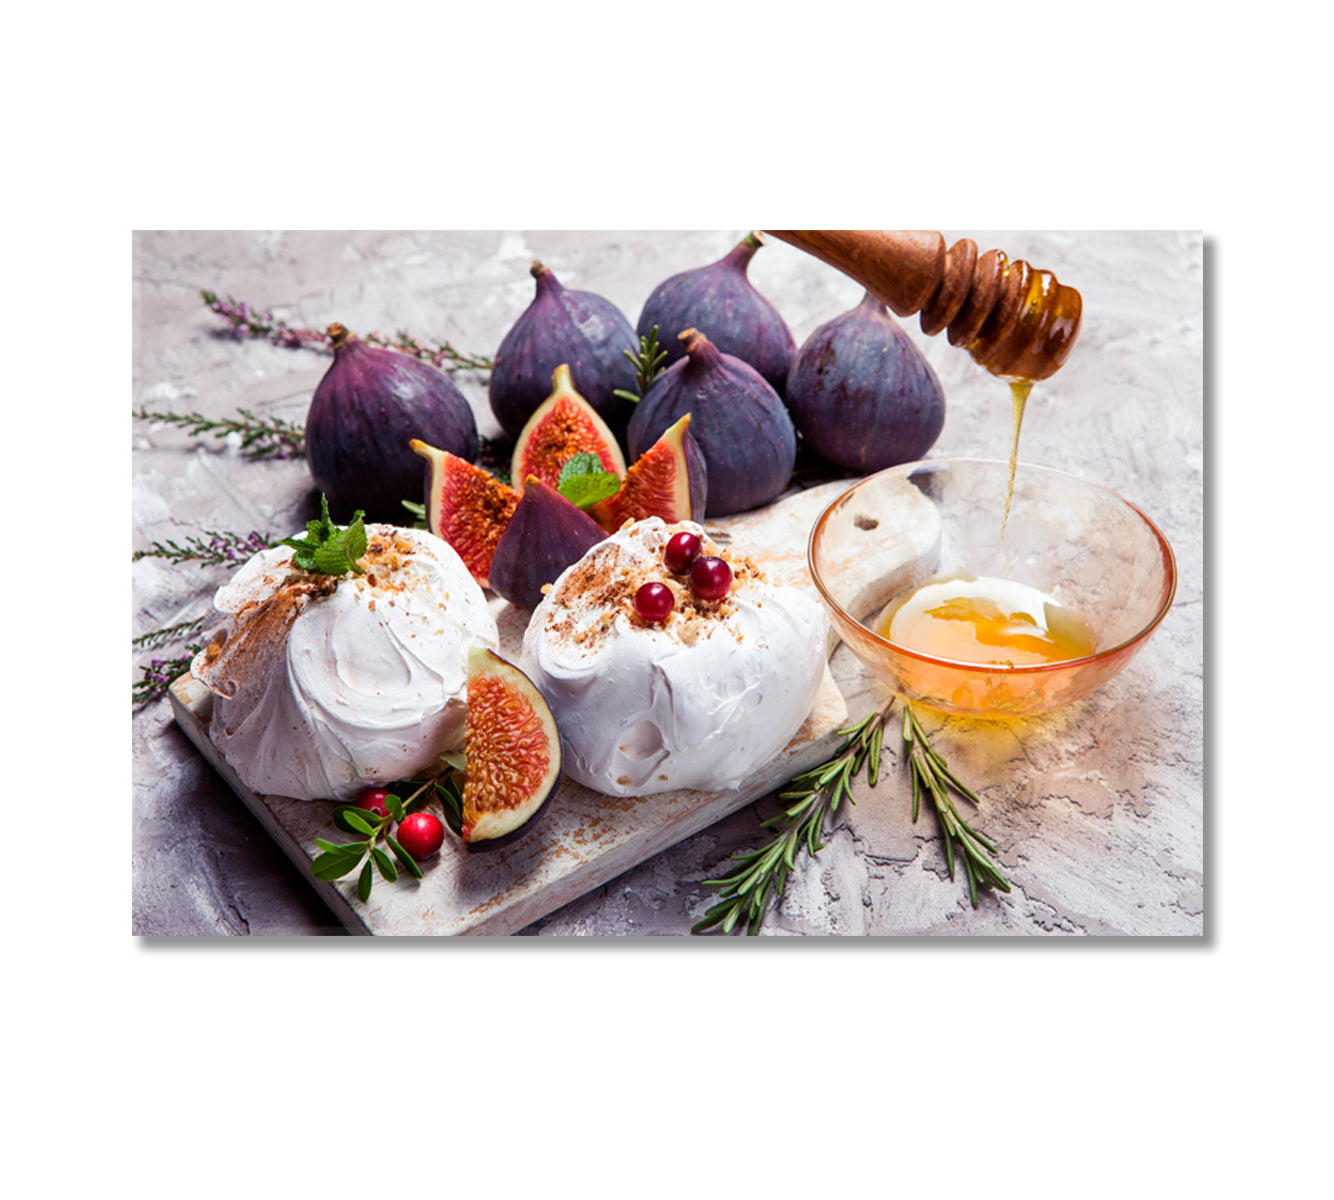 Mini Cake with Figs and Cranberries Canvas Print-Canvas Print-CetArt-1 Panel-24x16 inches-CetArt